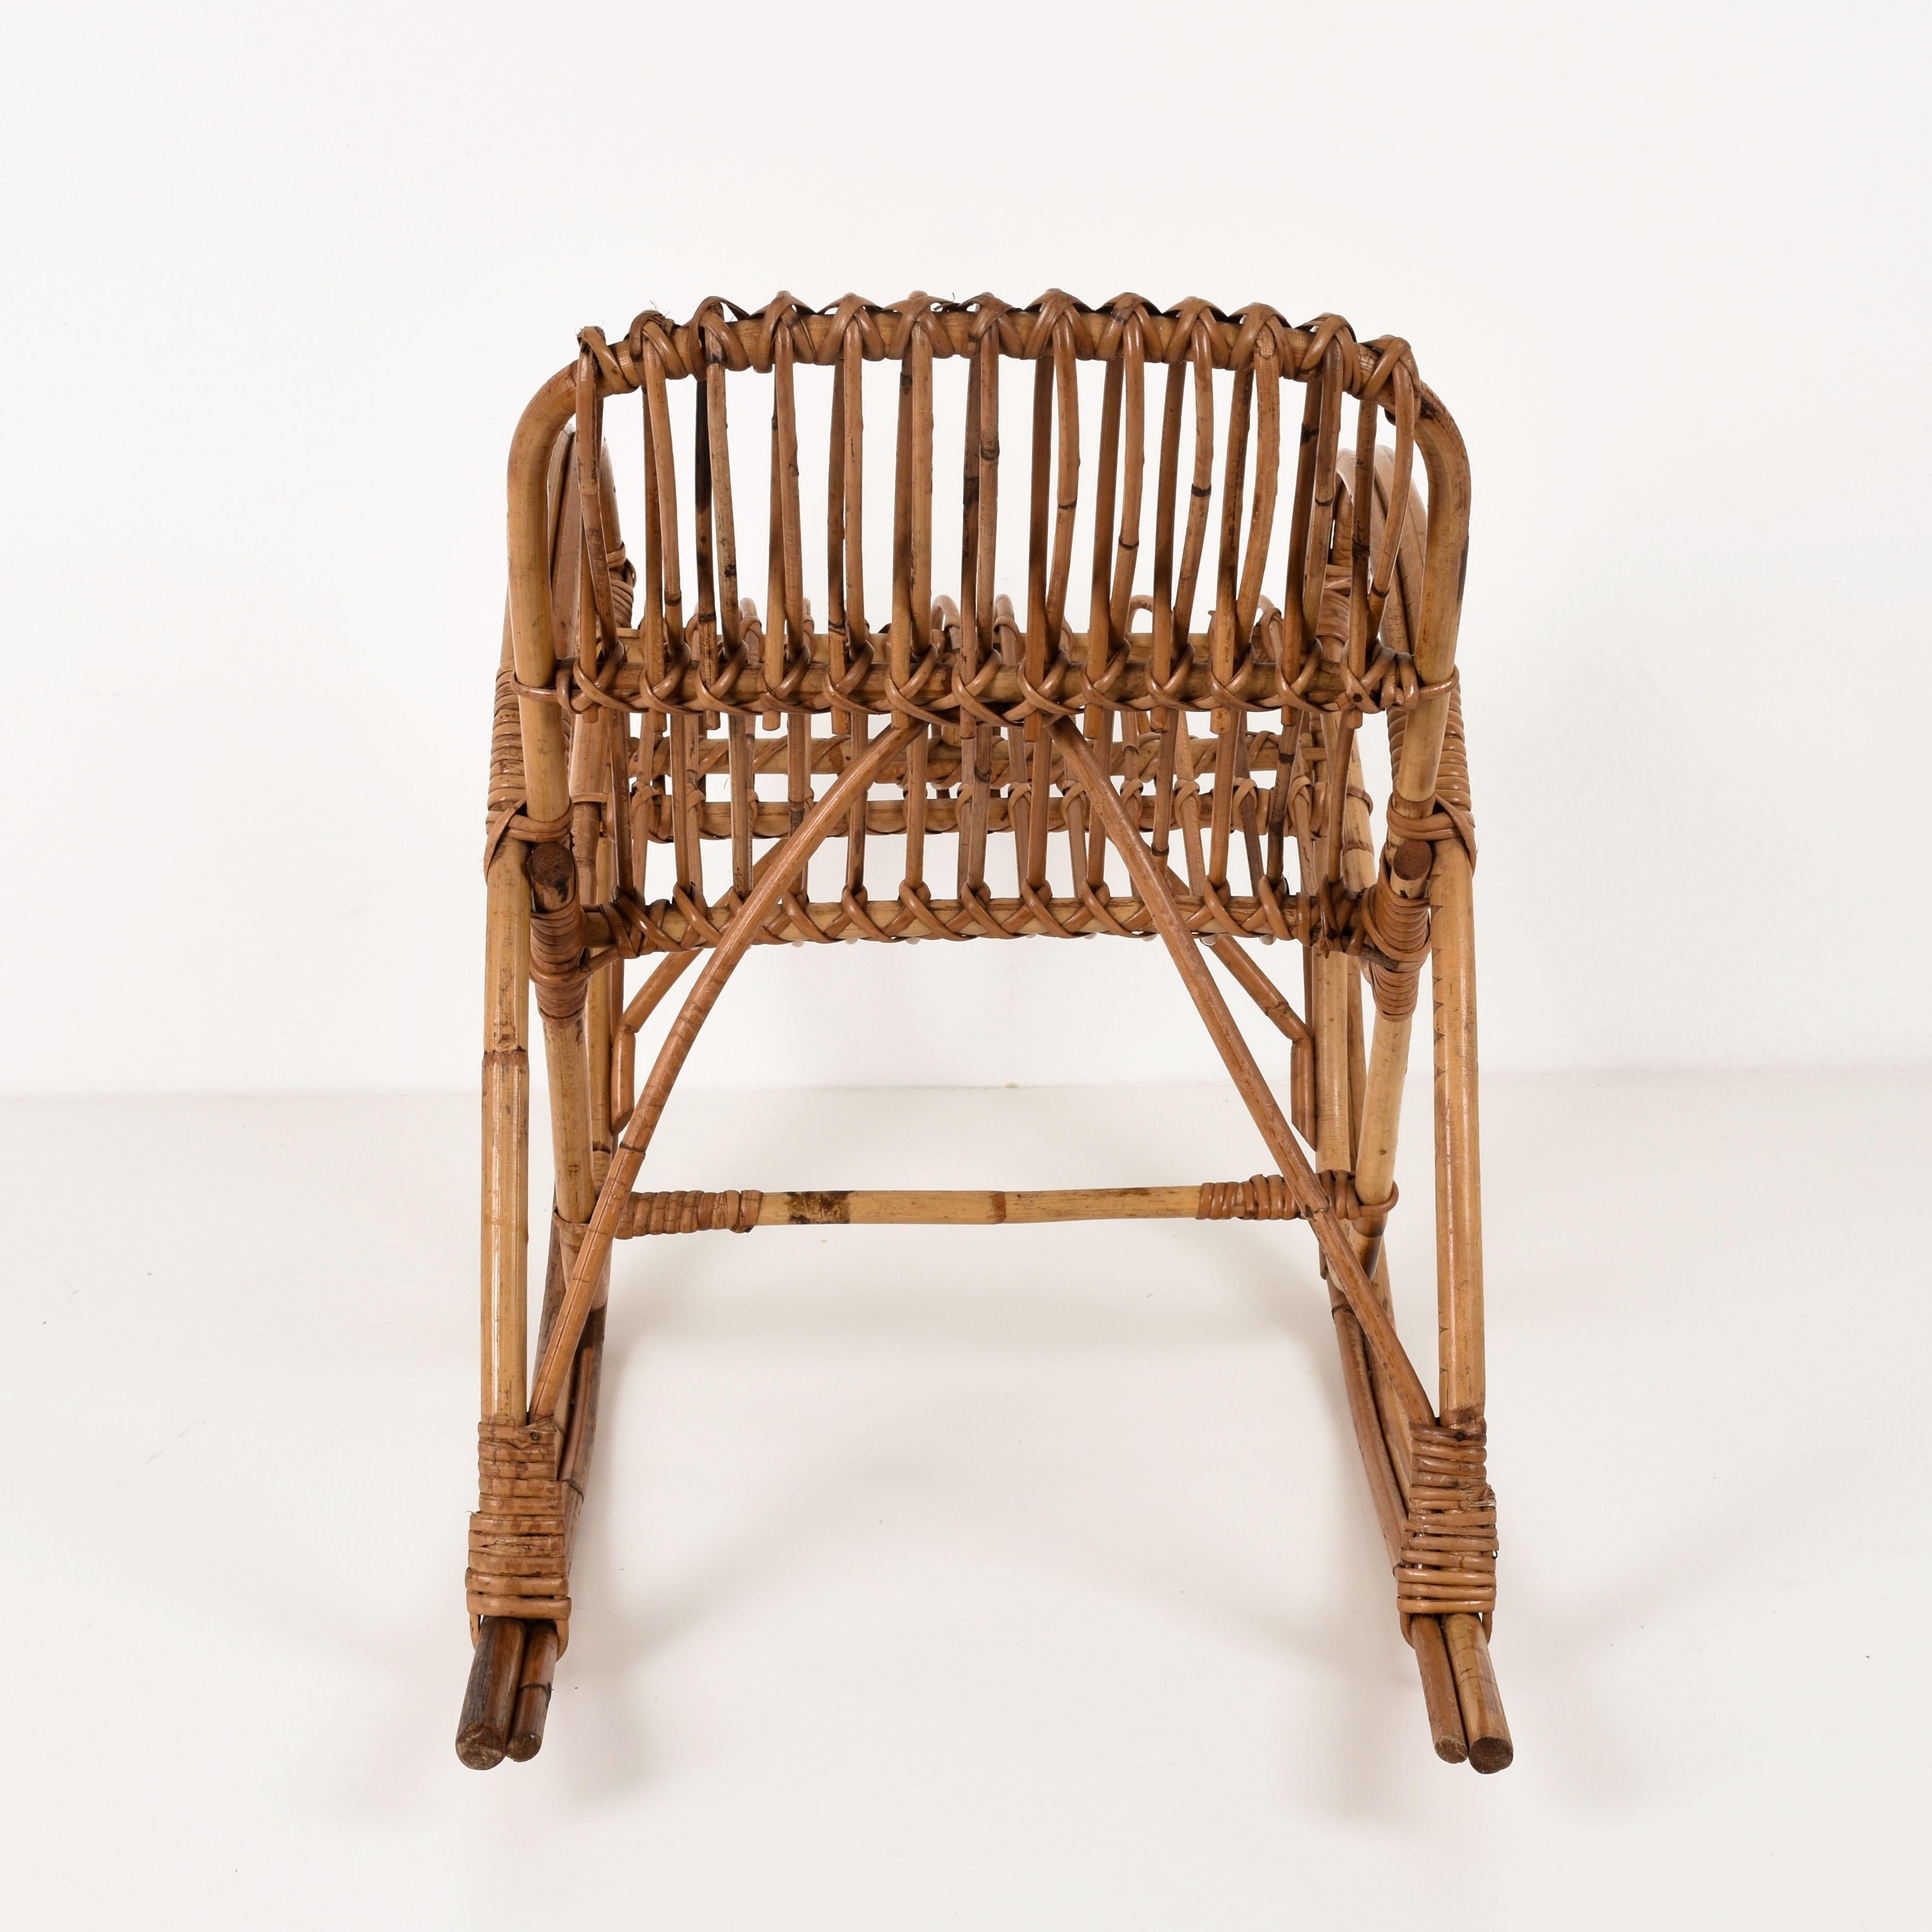 20th Century Midcentury Riviera Rattan and Bamboo Italian Rocking Chair for Children, 1950s For Sale